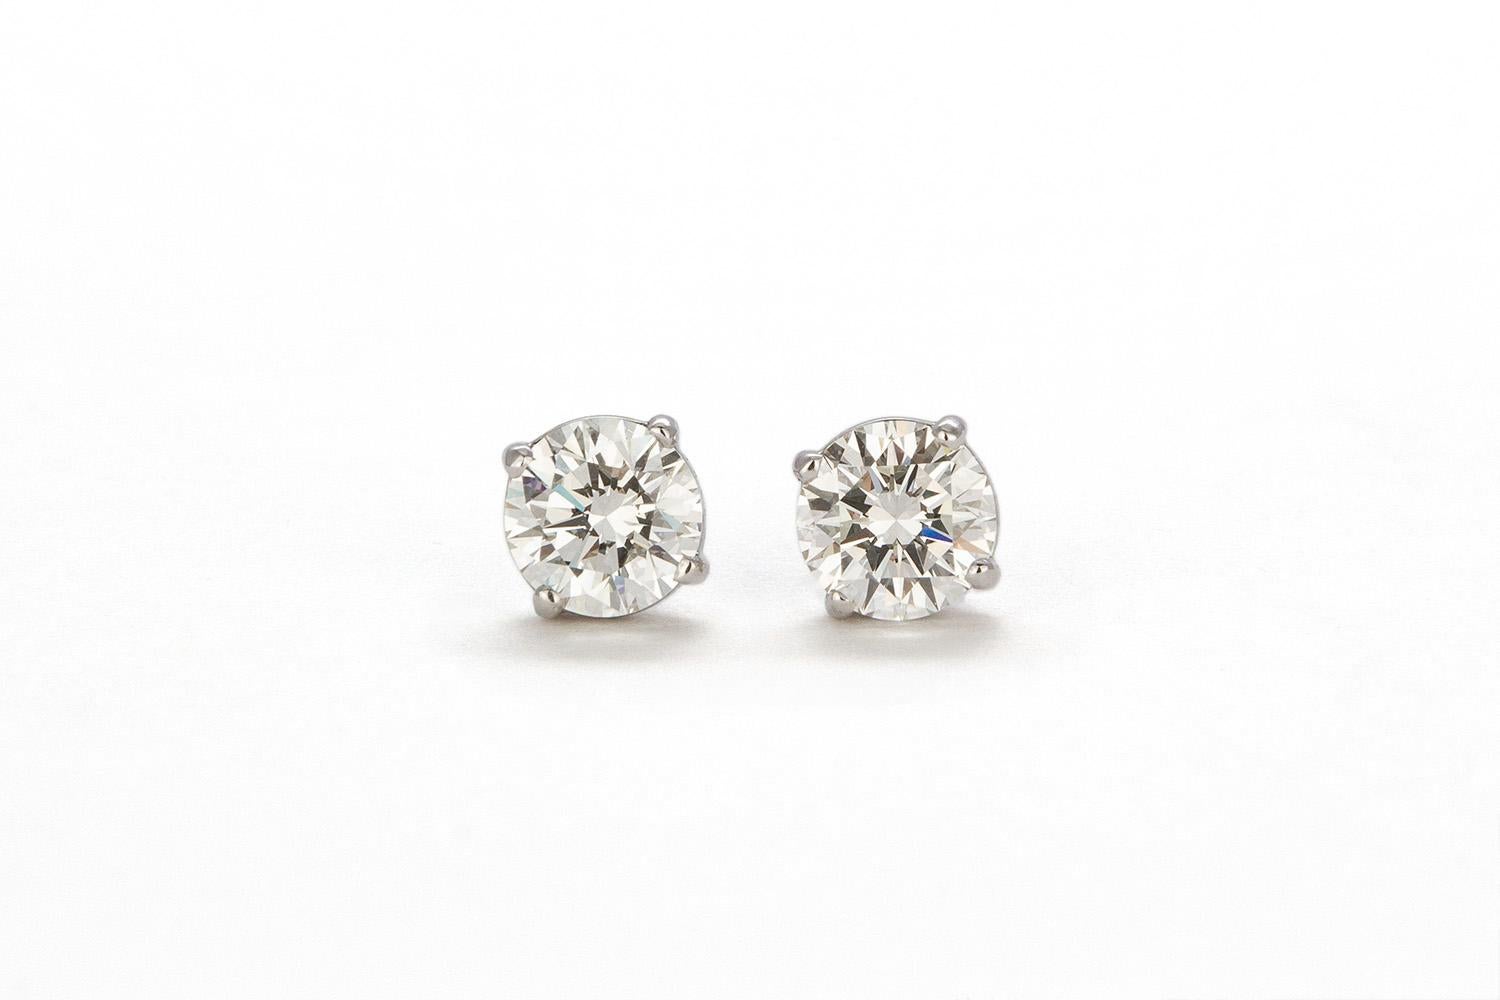 We are pleased to present these GRAFF GIA Certified & Laser Inscribed 18K White Gold & Diamond Stud Earrings 2.08ctw I/VVS2. These beautiful earrings feature two GRAFF GIA certified 1.04ct I/VVS2 Round Brilliant Cut Diamonds set in GRAFF 18k White